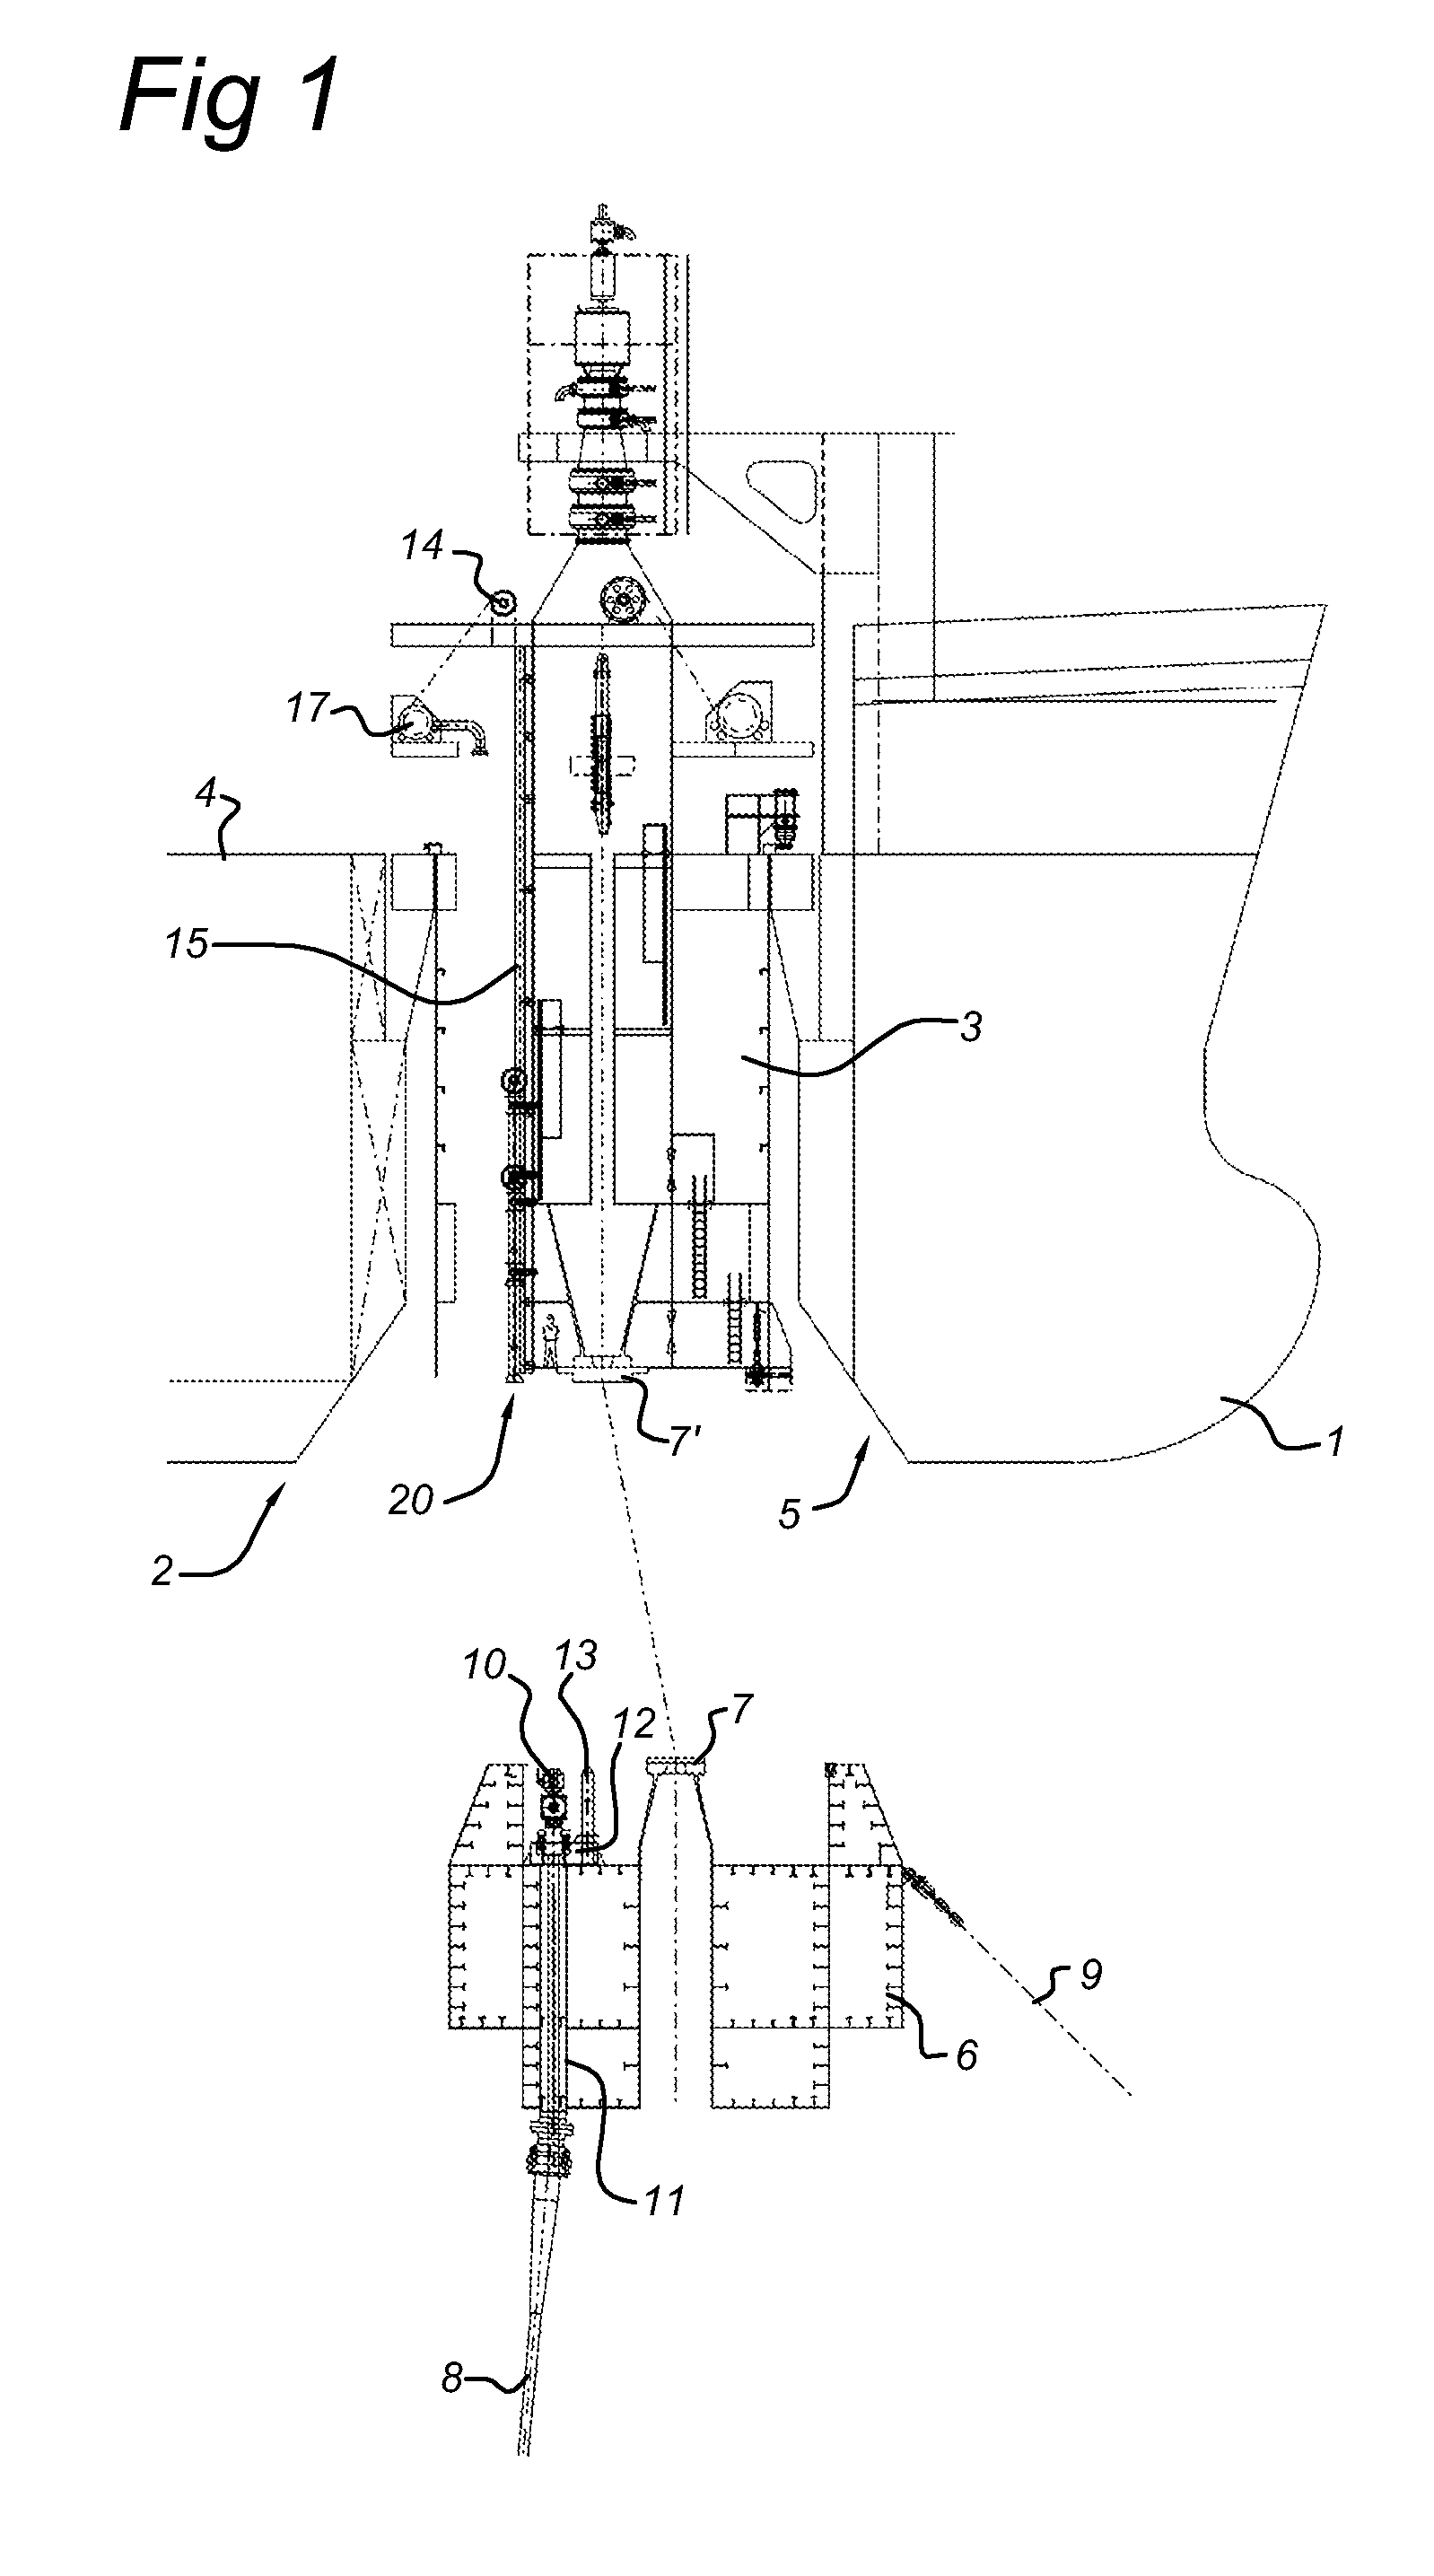 Disconnectable buoyant turrent mooring system